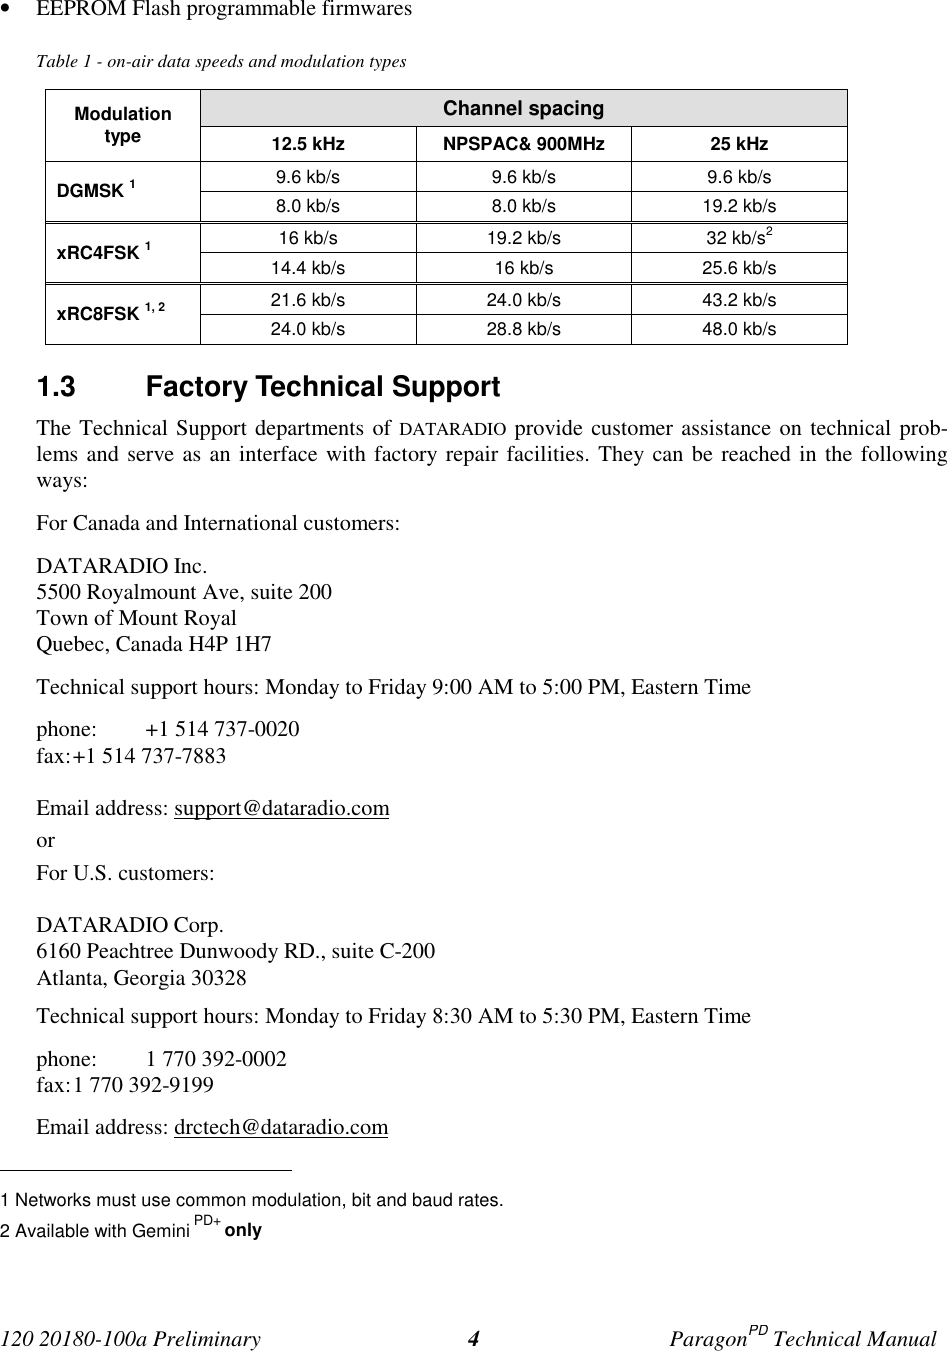 Page 8 of CalAmp Wireless Networks BDD4T85-1 Paragon/PD User Manual Parg PD  T100a Prelim